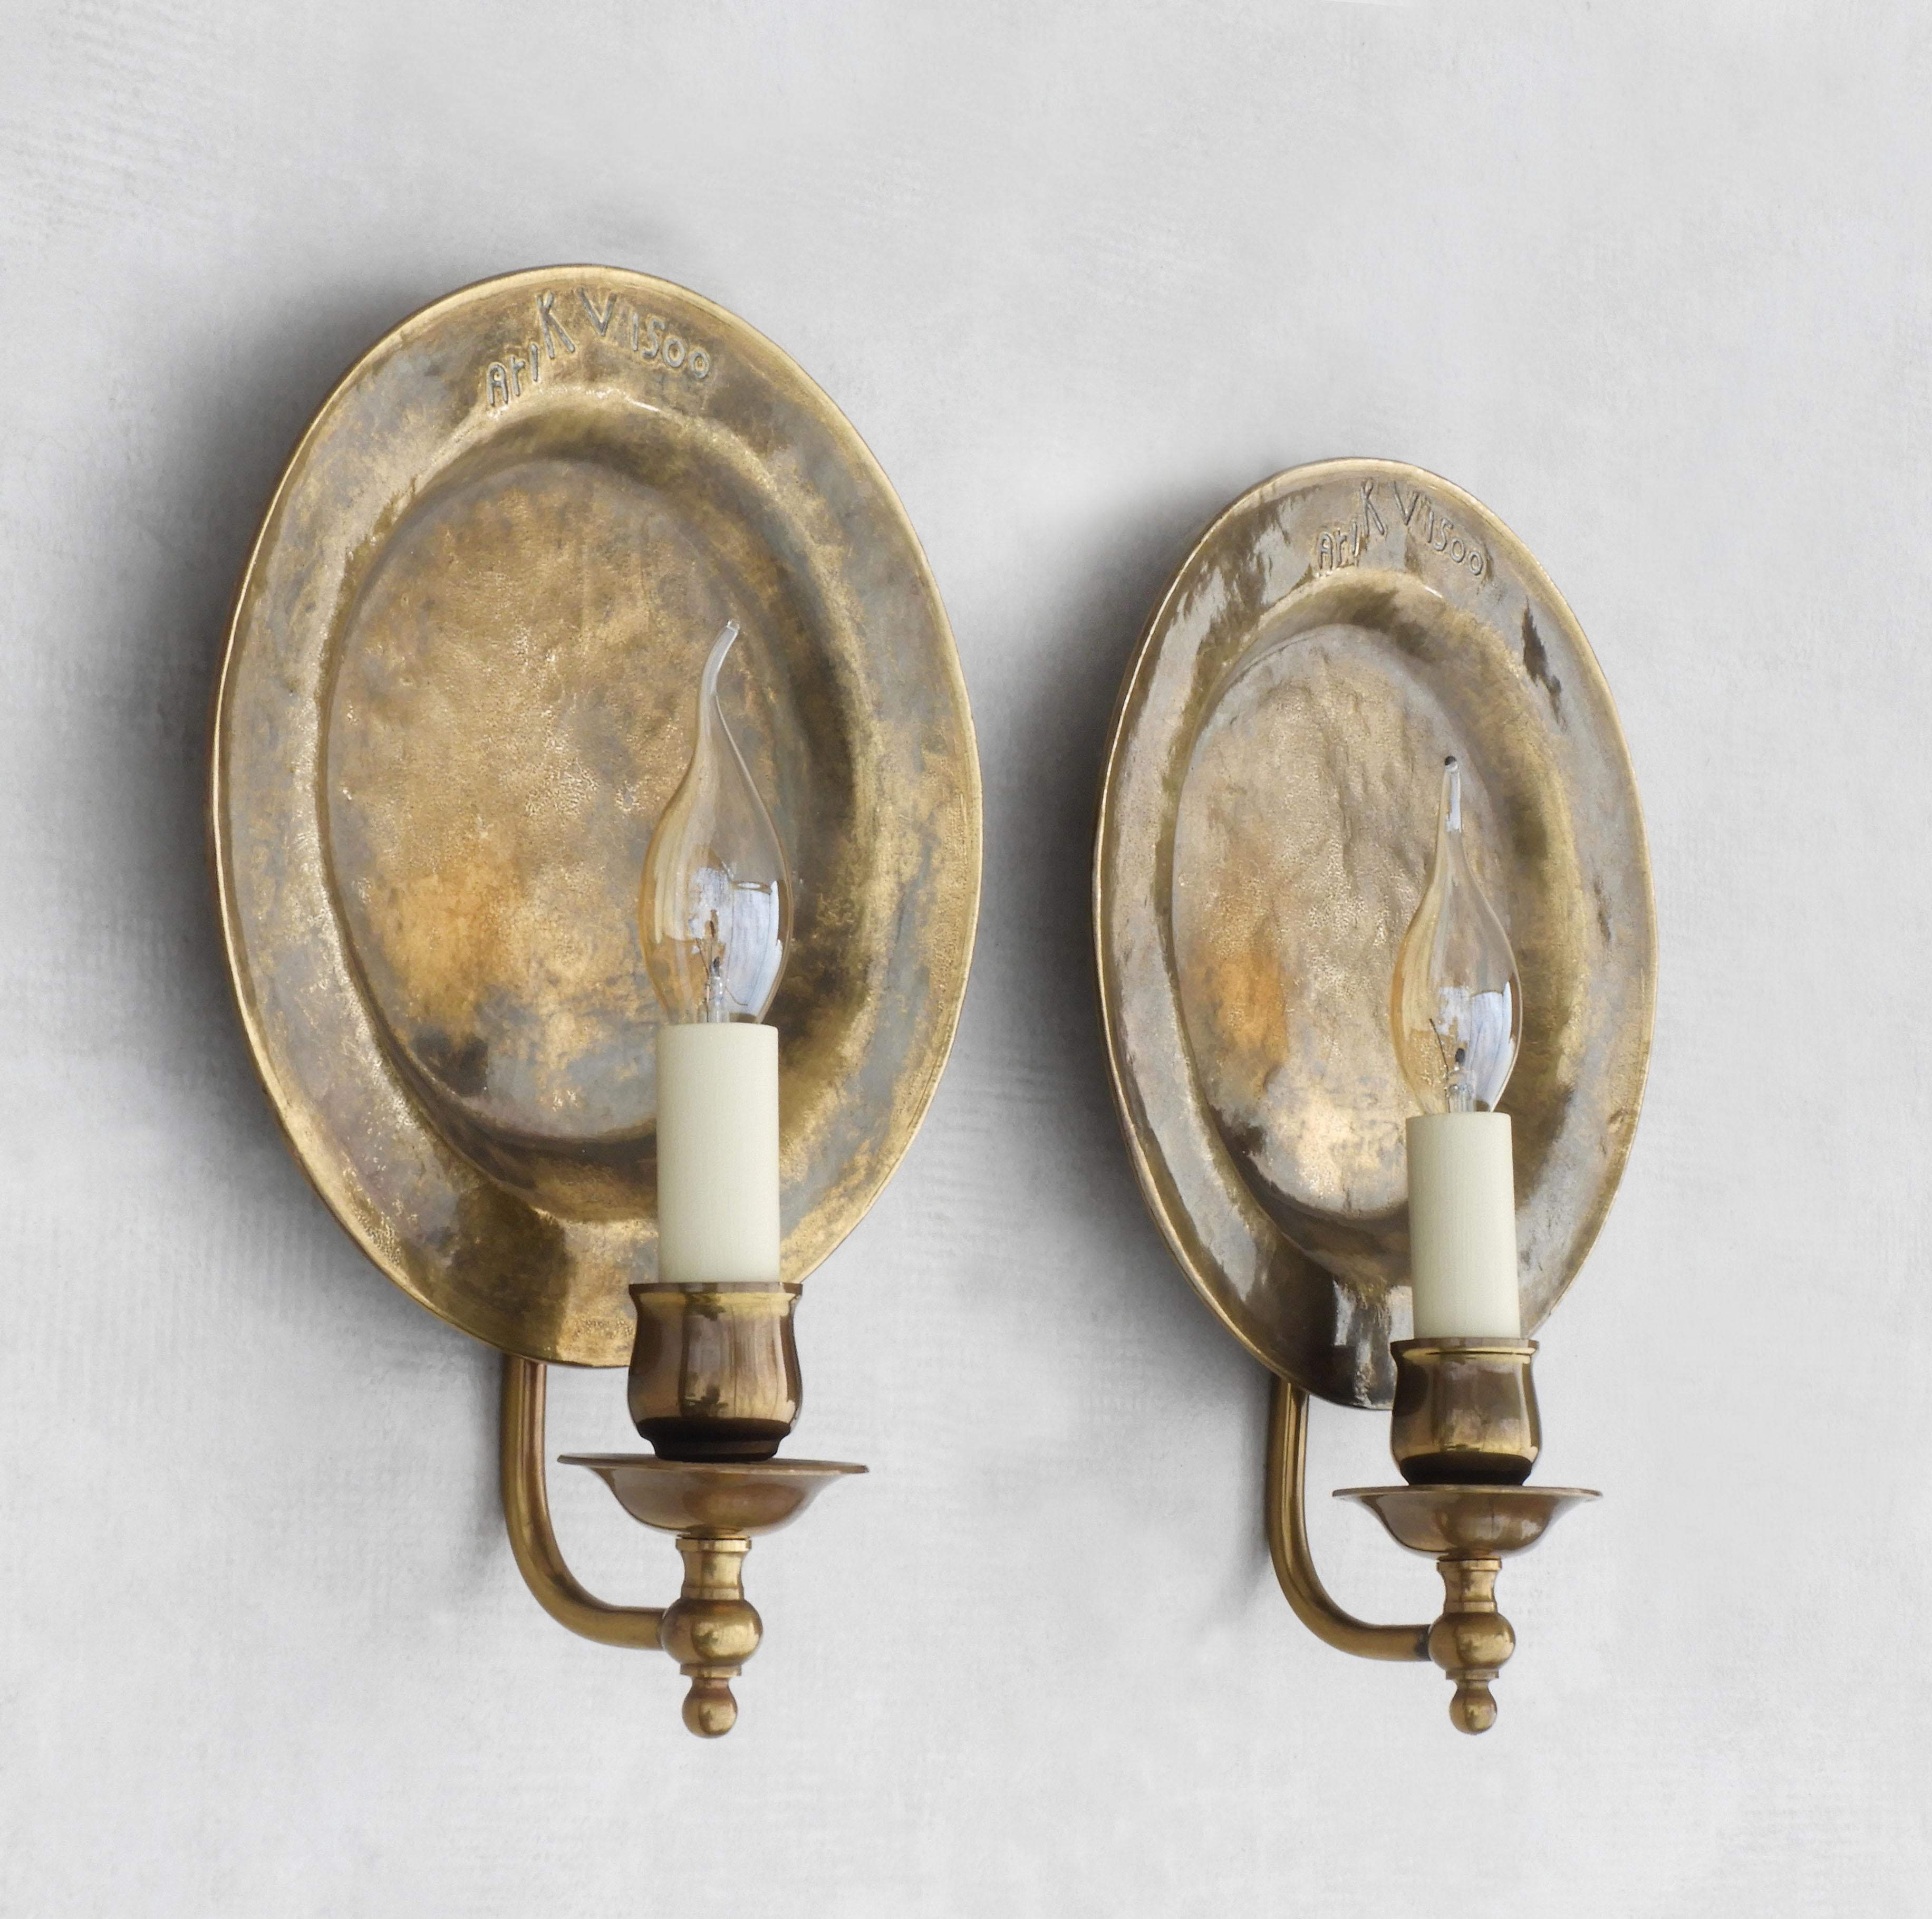 Brutalist Pair of Large Round ‘Moon’ Bronze Wall Light Sconces C1970s France.